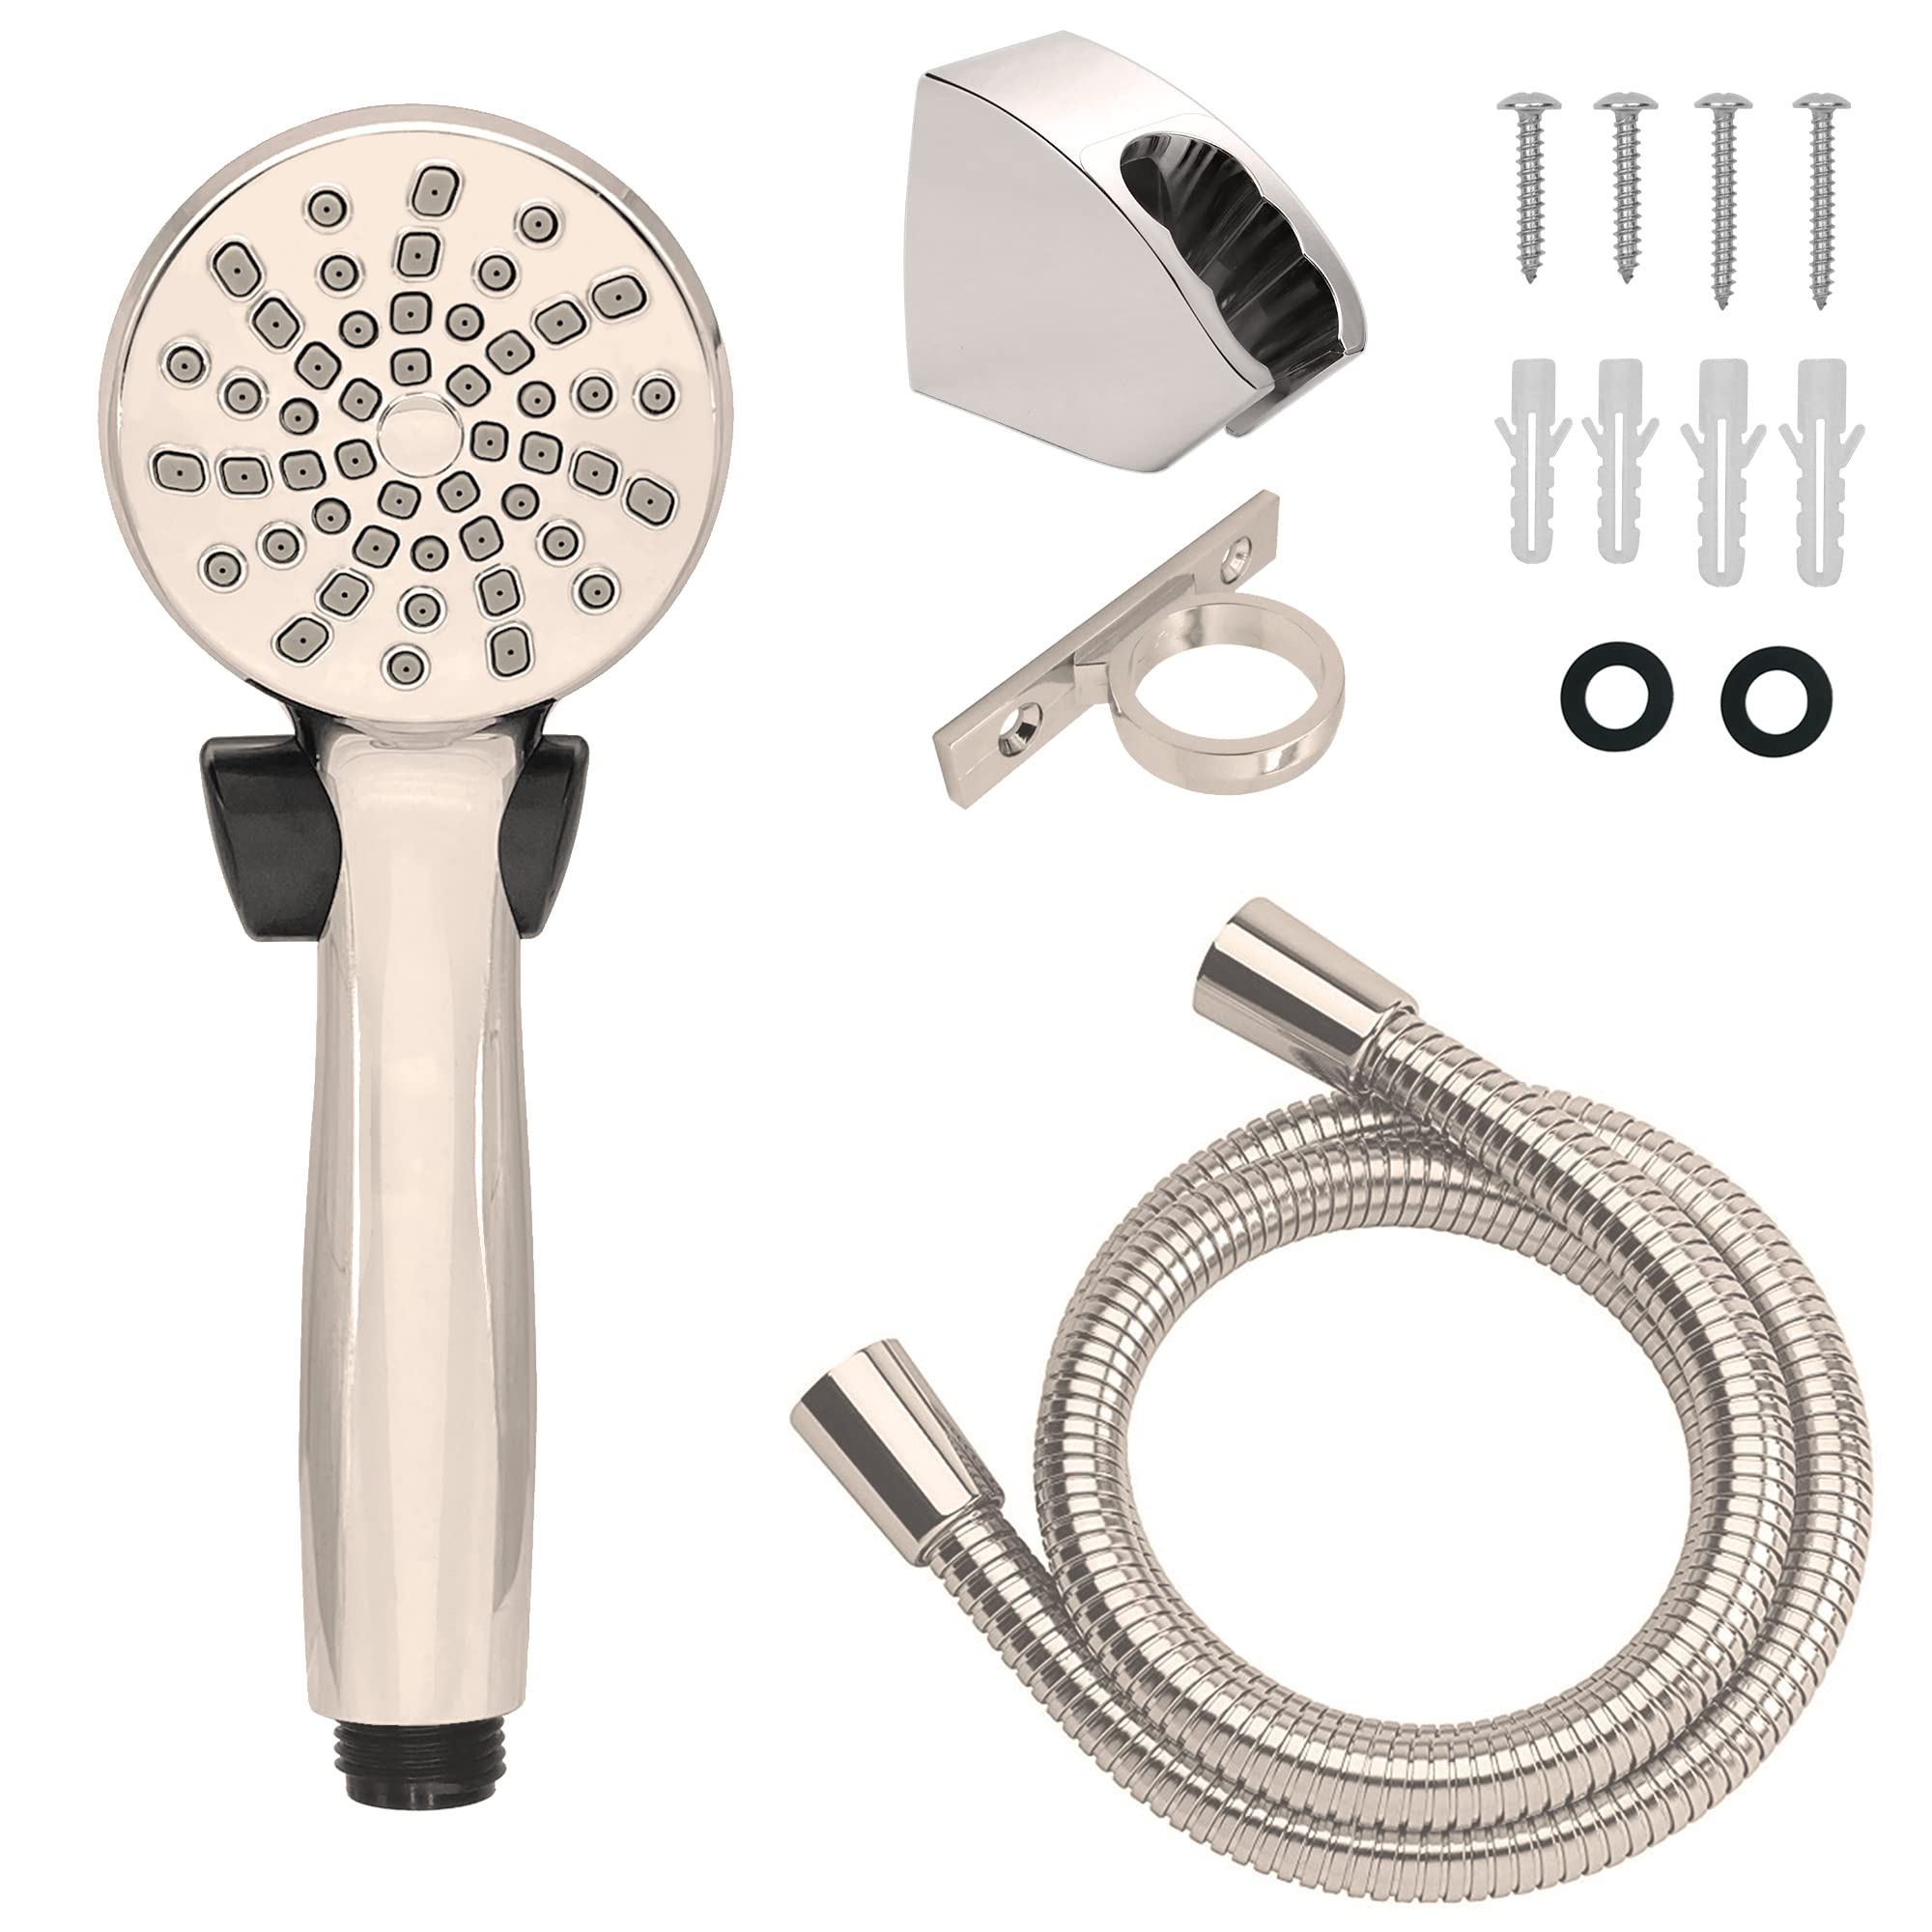 AweLife RV Shower Head with Hose and On Off Switch, Water Saving High Pressure Shower Head with Shower Hose guide Ring and Shower Holder